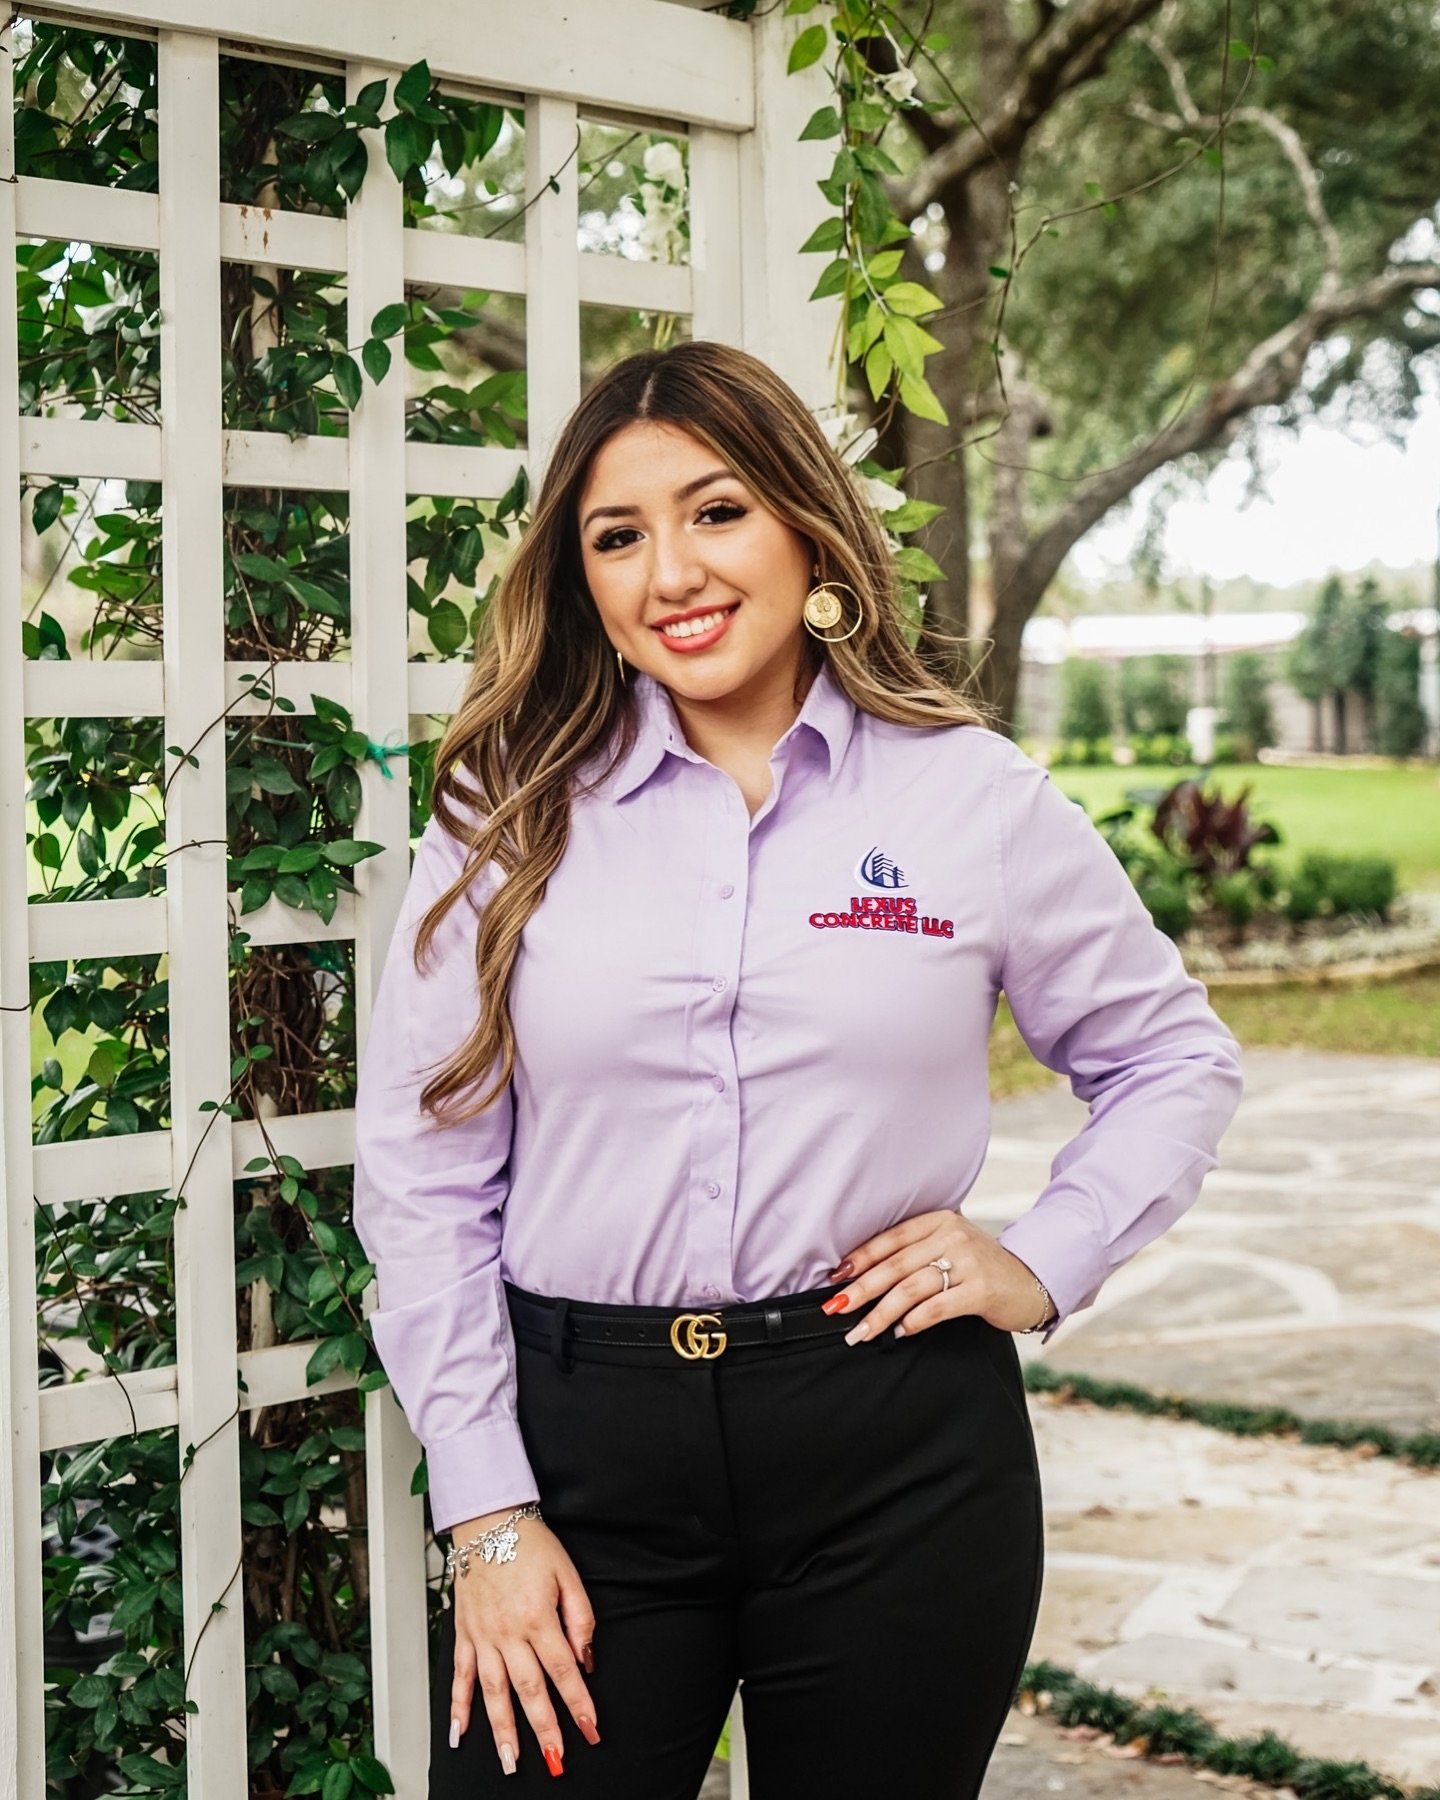 Please help us wish a Happy Birthday to our office assistant, Alaina! 🥳🎉 Our whole team is wishing you the happiest of birthdays and a great year ahead. 👏⁠
⁠
Leave her birthday wishes in the comments! 🎂⁠🎊⁠
⁠
#houstonconstruction #concretecontrac